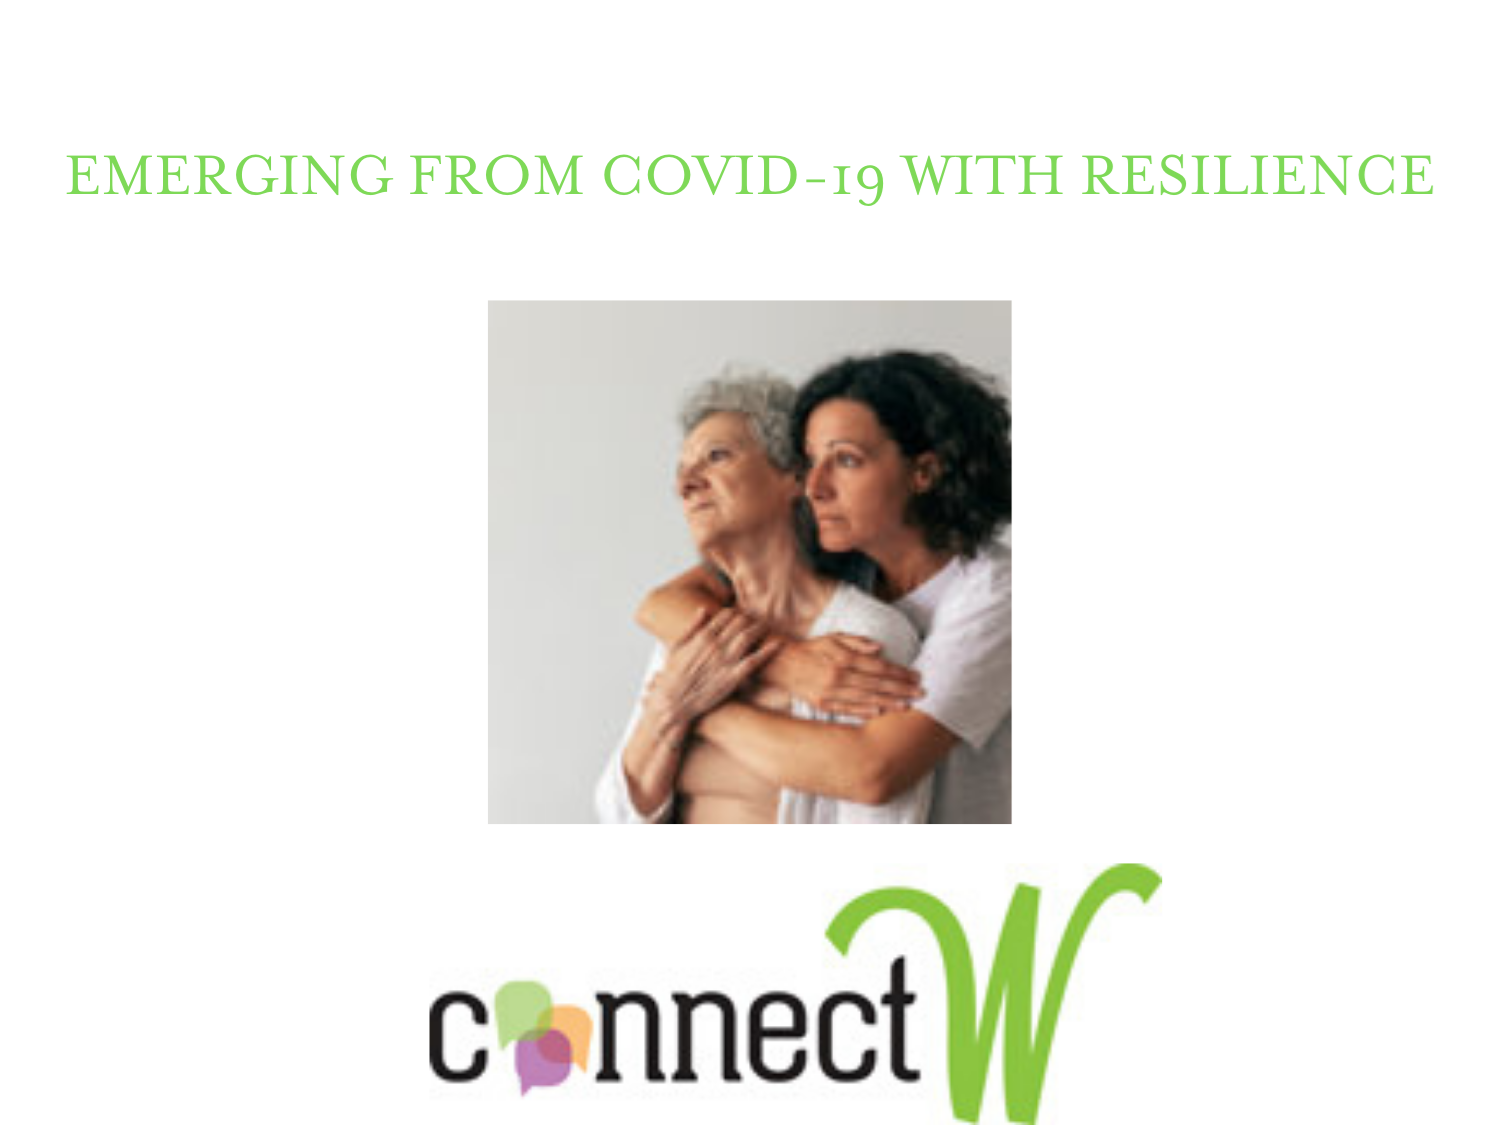 EMERGING FROM COVID-19 WITH RESILIENCE